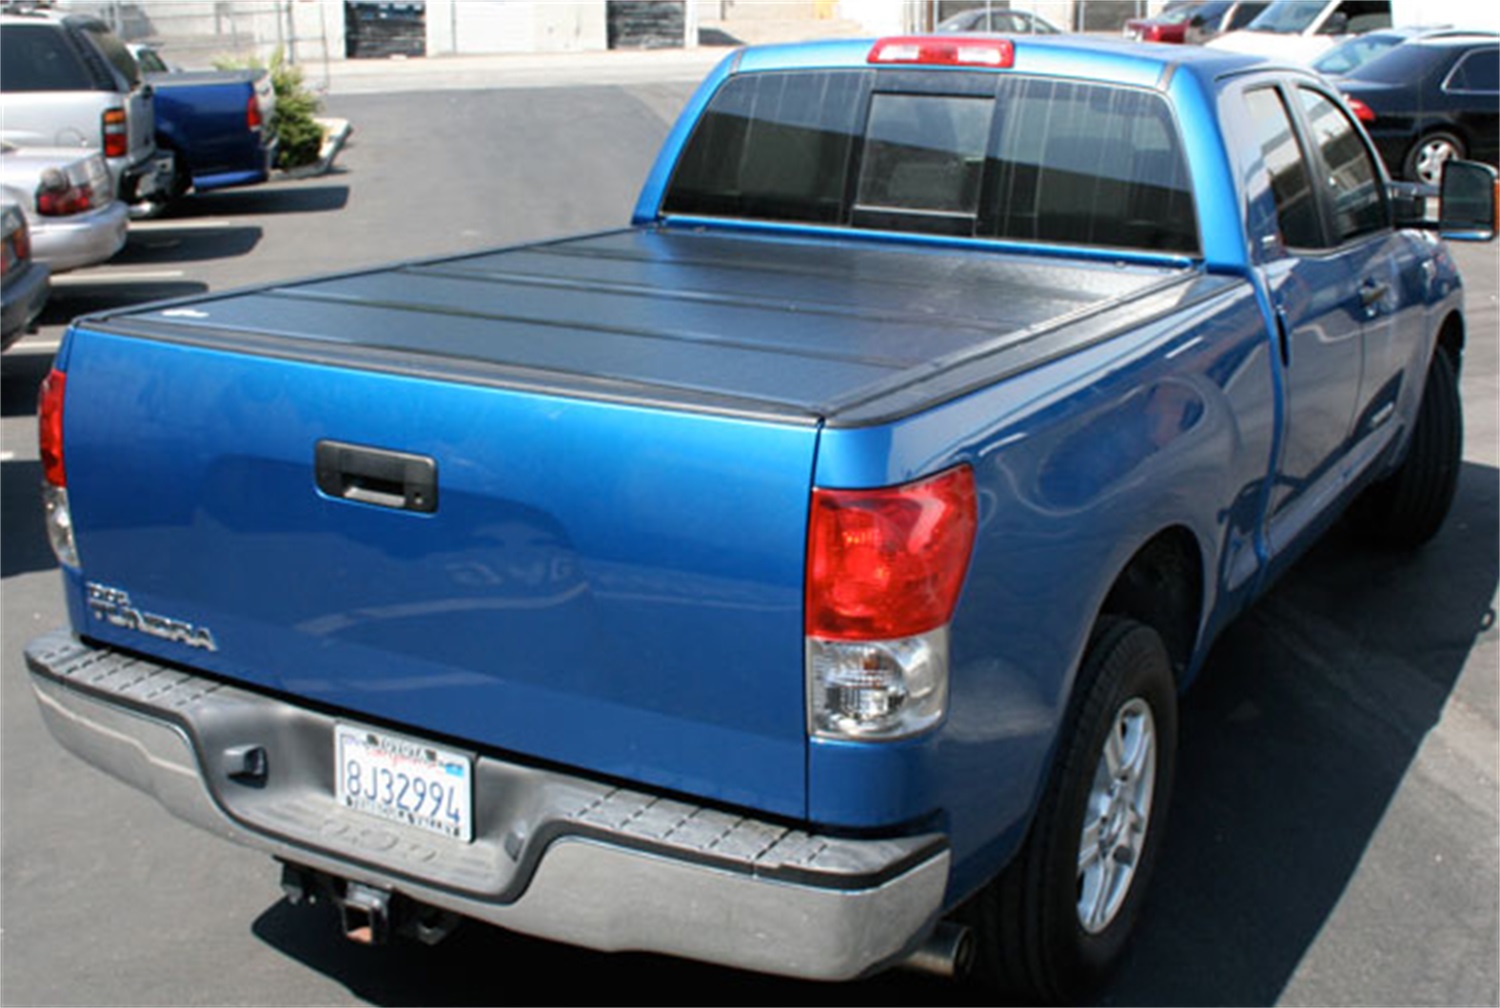 BAK Industries BAK Industries 35407 Truck Bed Cover Fits 05-15 Tacoma